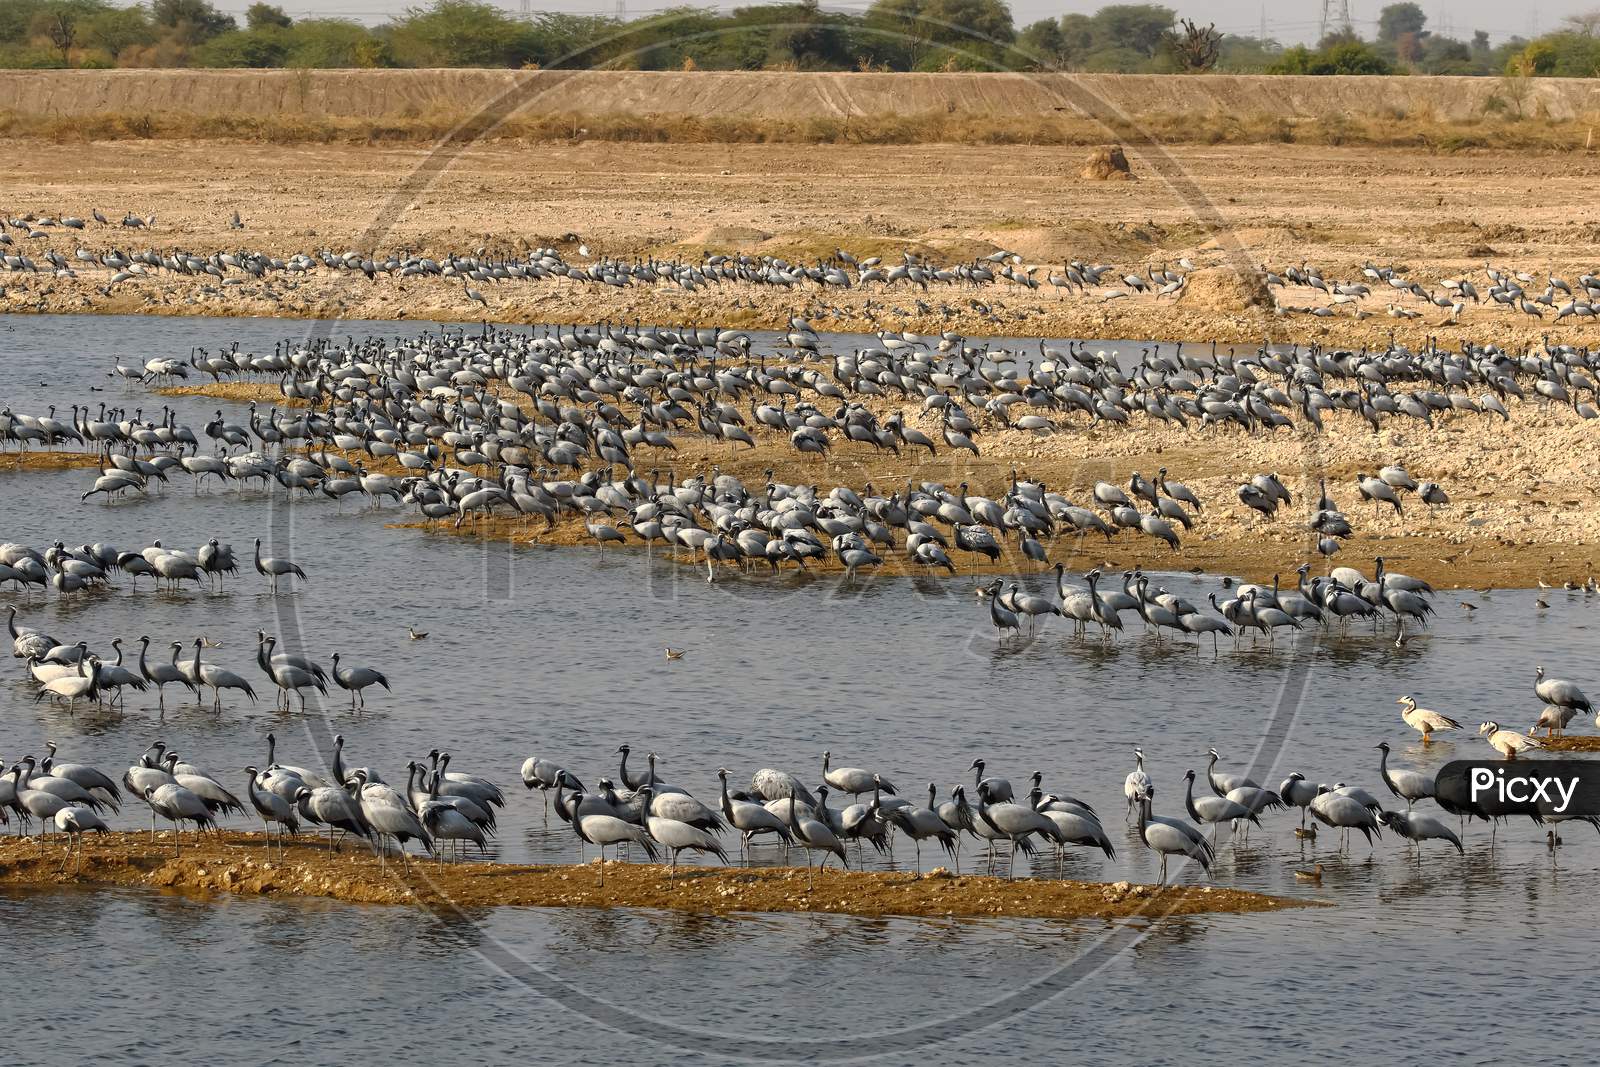 Large flocks of demoiselle cranes also known as grus virgo  congregated at their migrating grounds